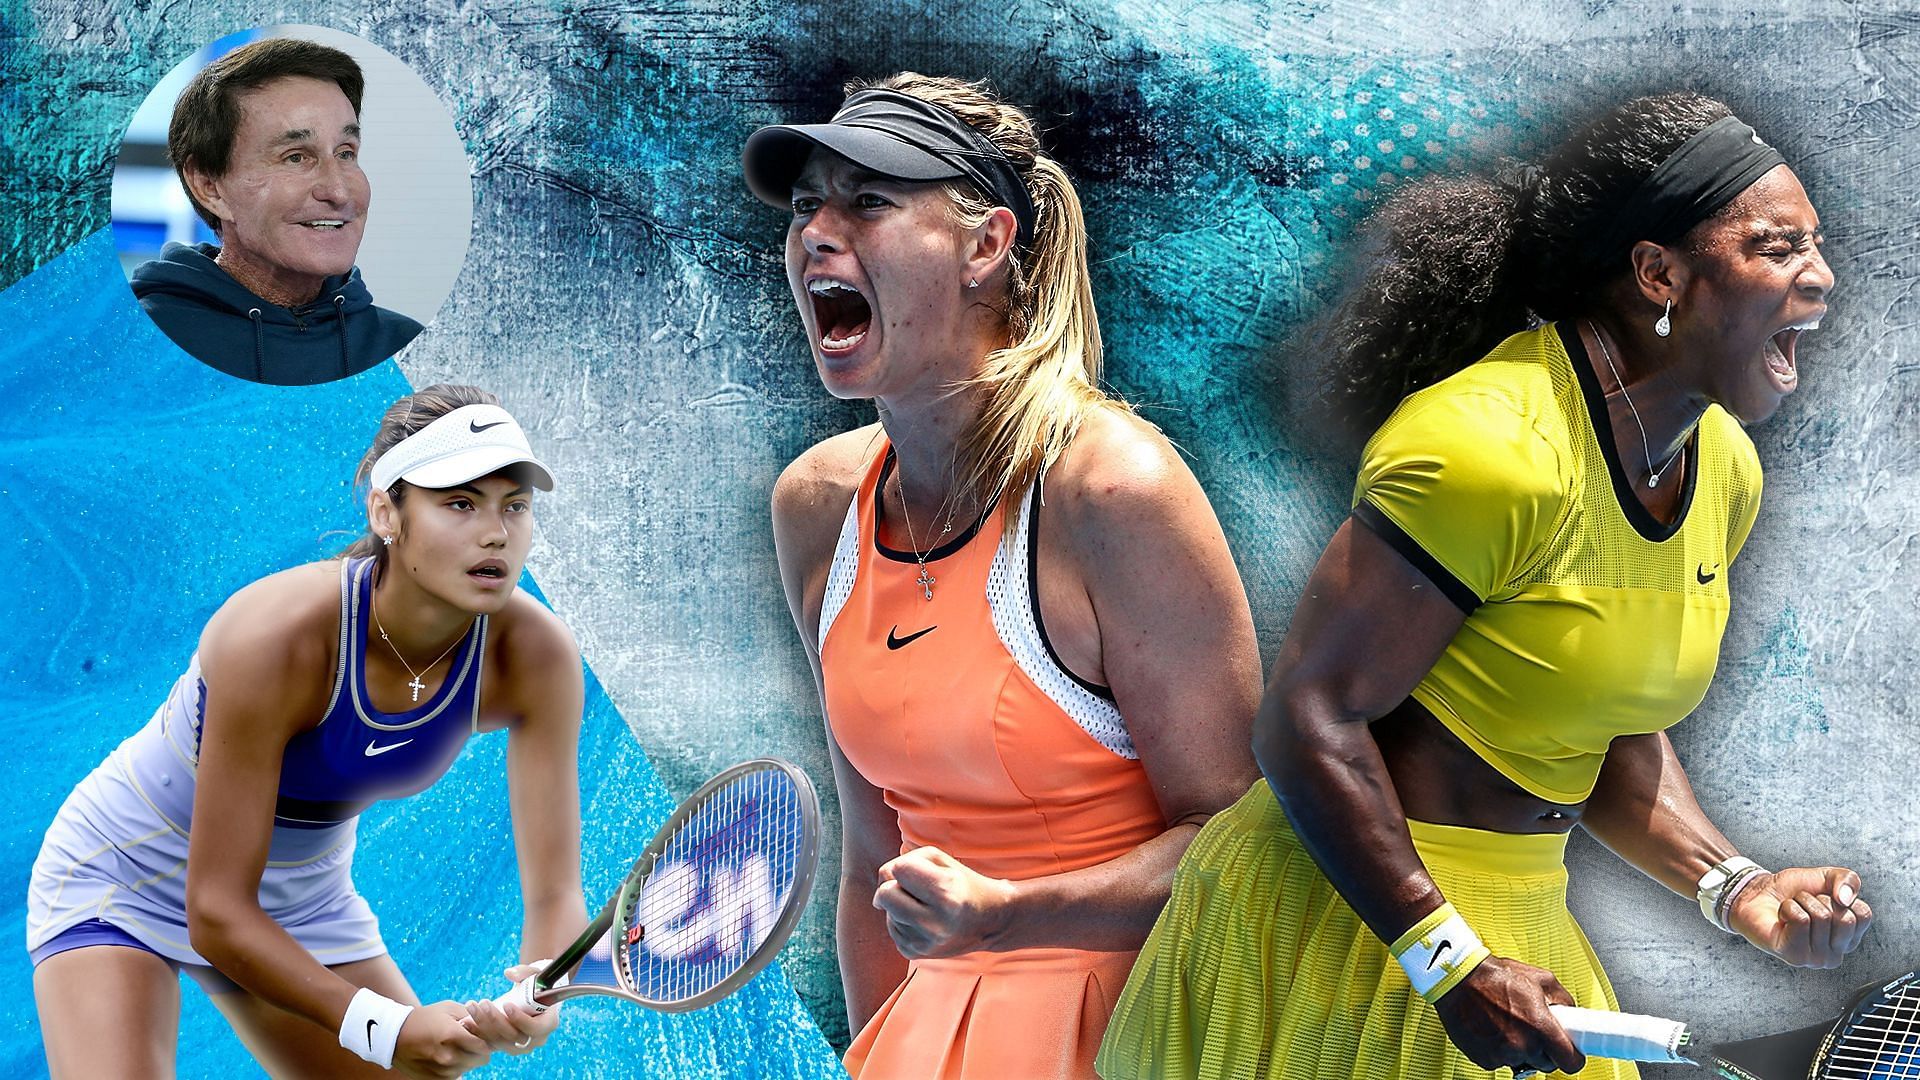 Rick Macci discussed Serena Williams, Maria Sharapova and Emma Raducanu, among others, in a recent interview with Sportskeeda